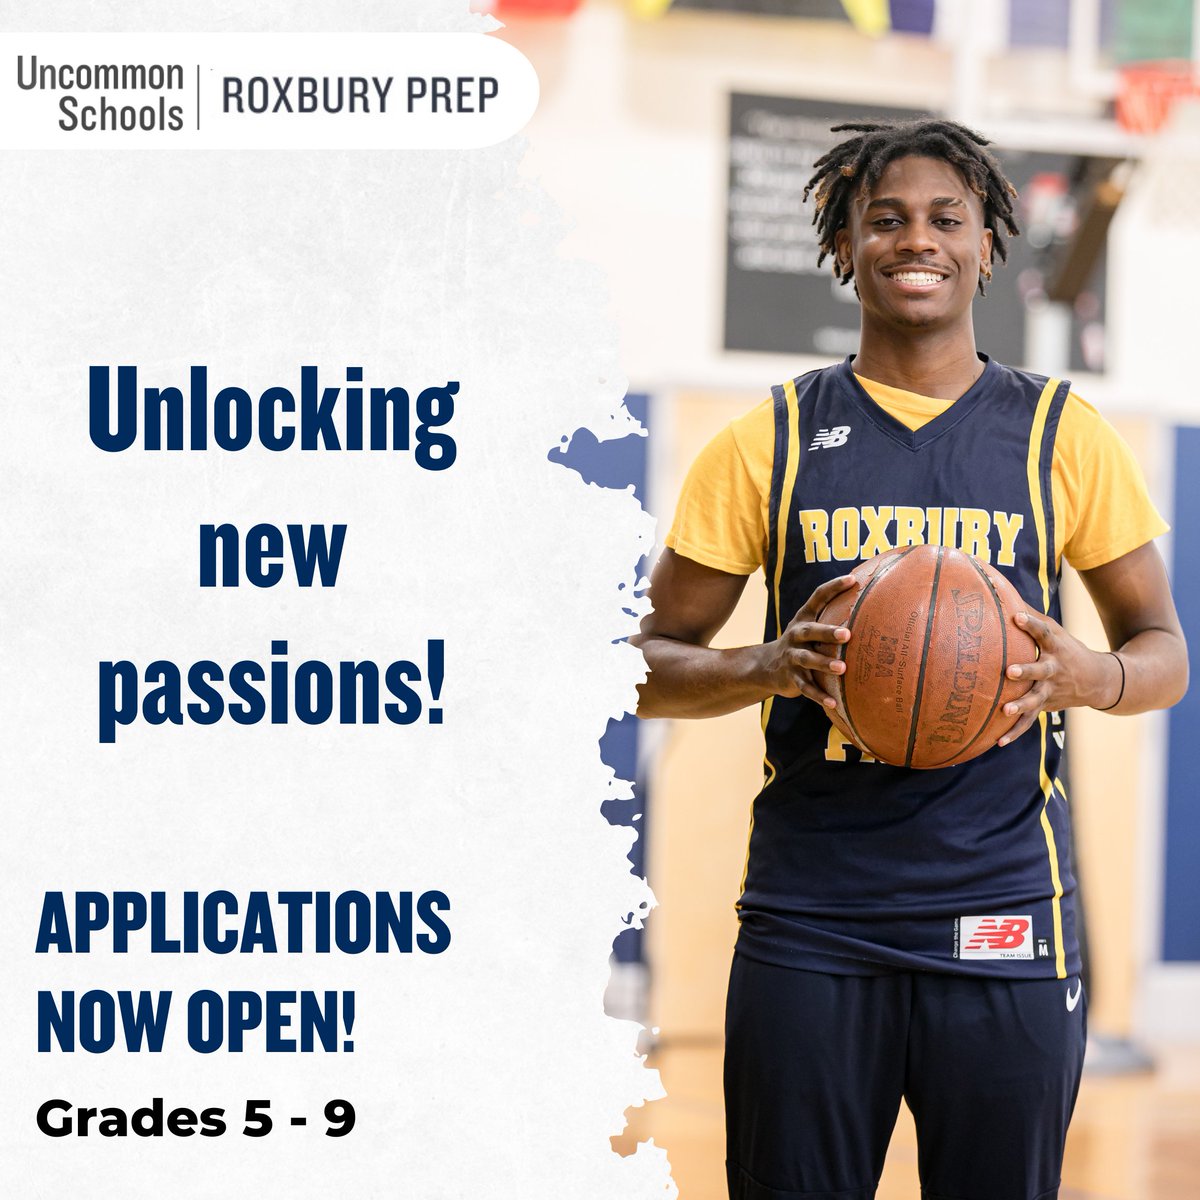 Enroll at Roxbury Prep and let your potential shine through our diverse extracurricular offerings. Enroll today: roxburyprep.org/enroll